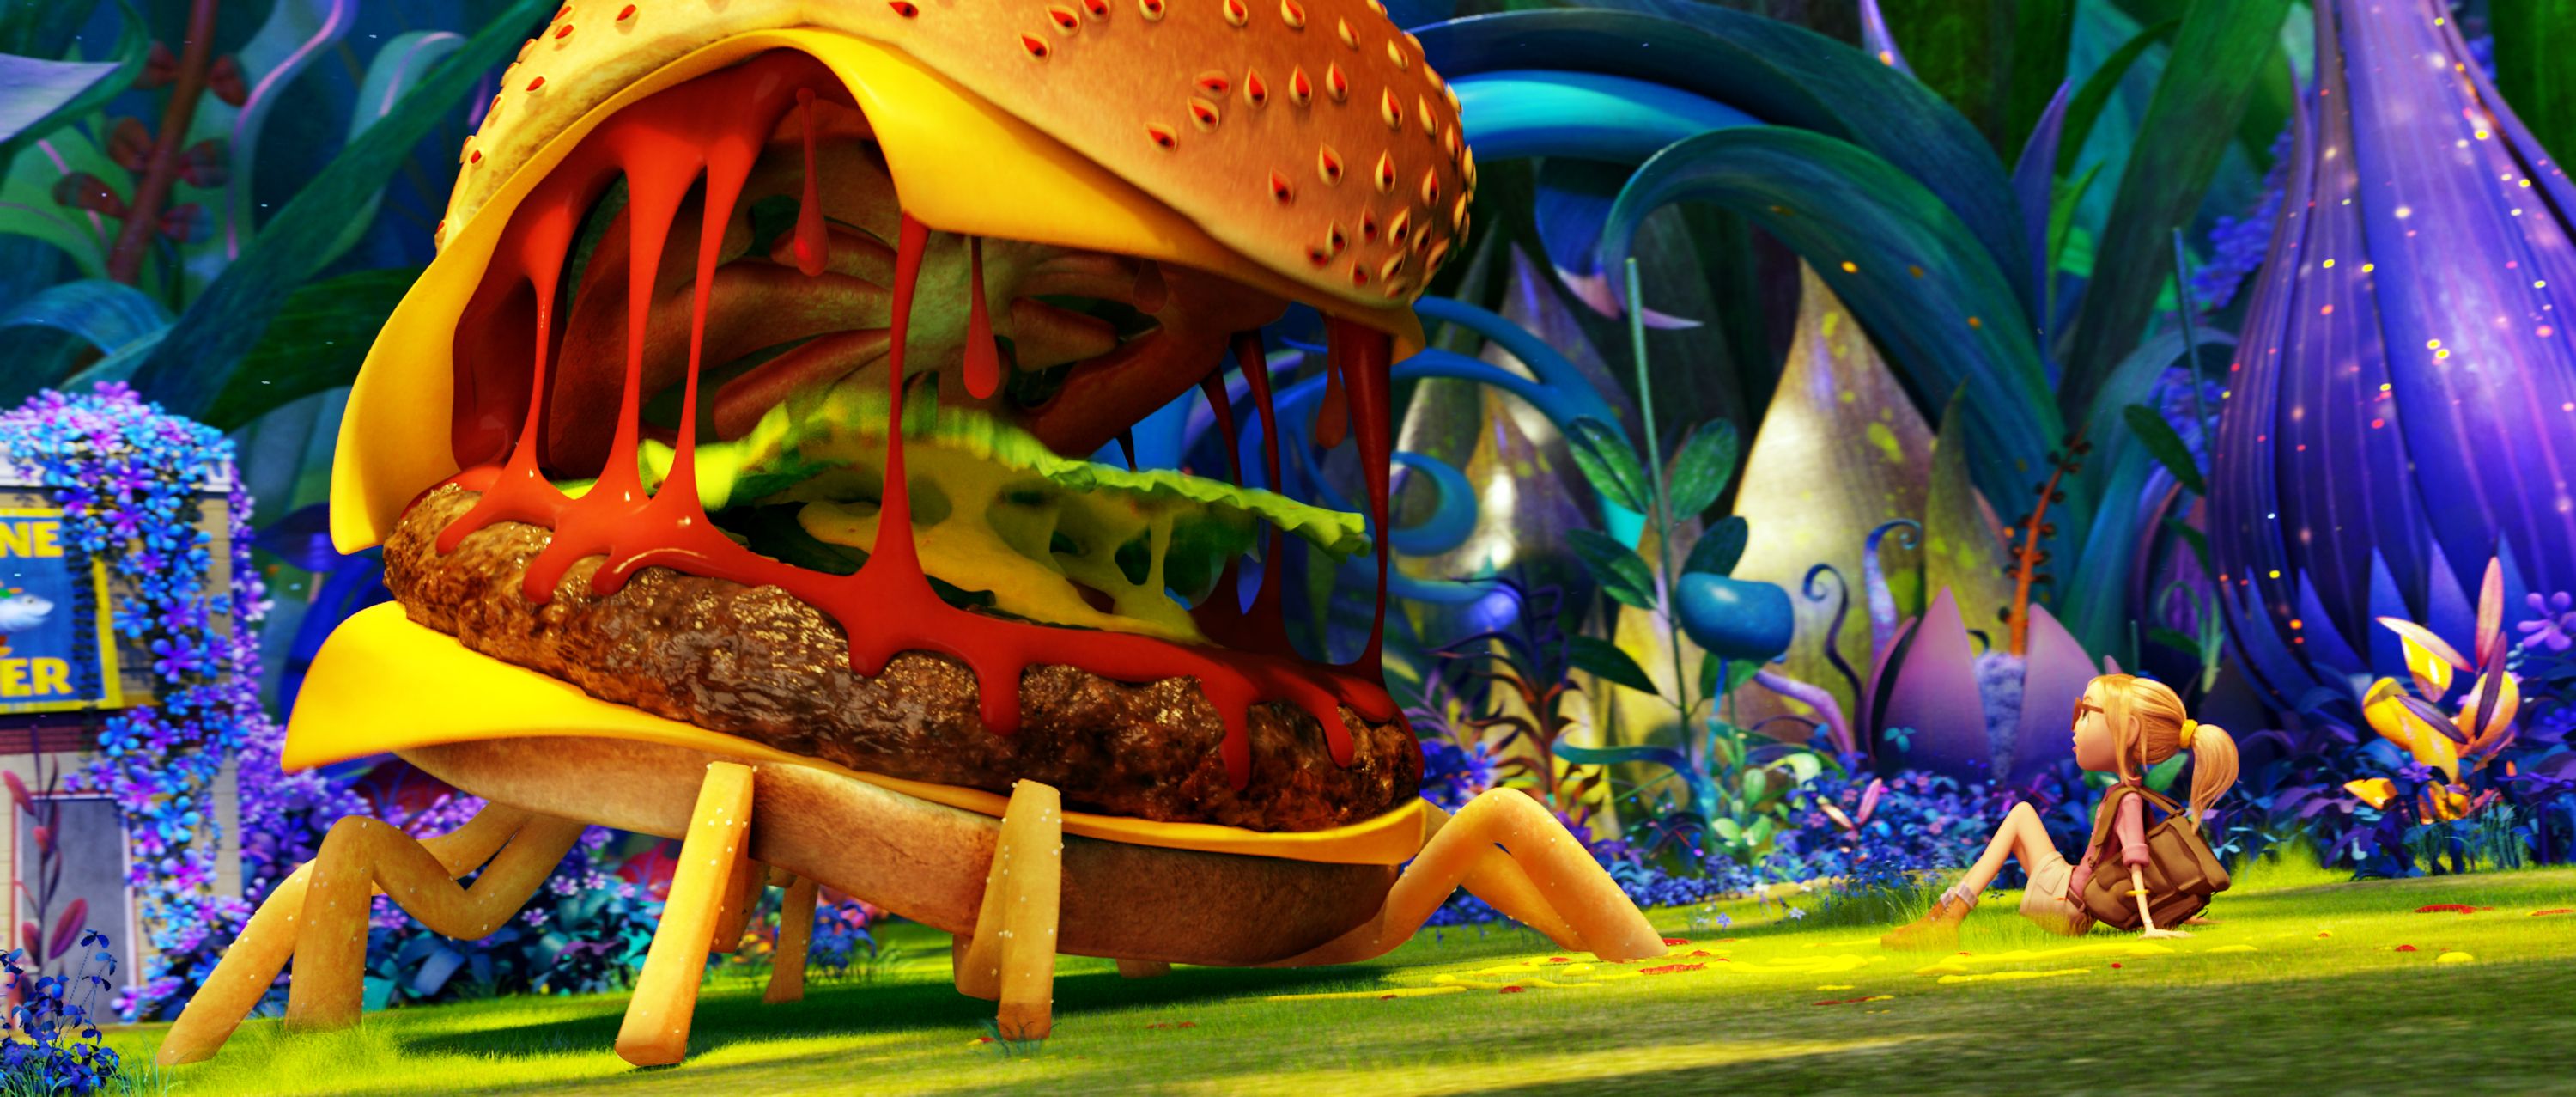 Cloudy with a Chance of Meatballs 2 Photo 6